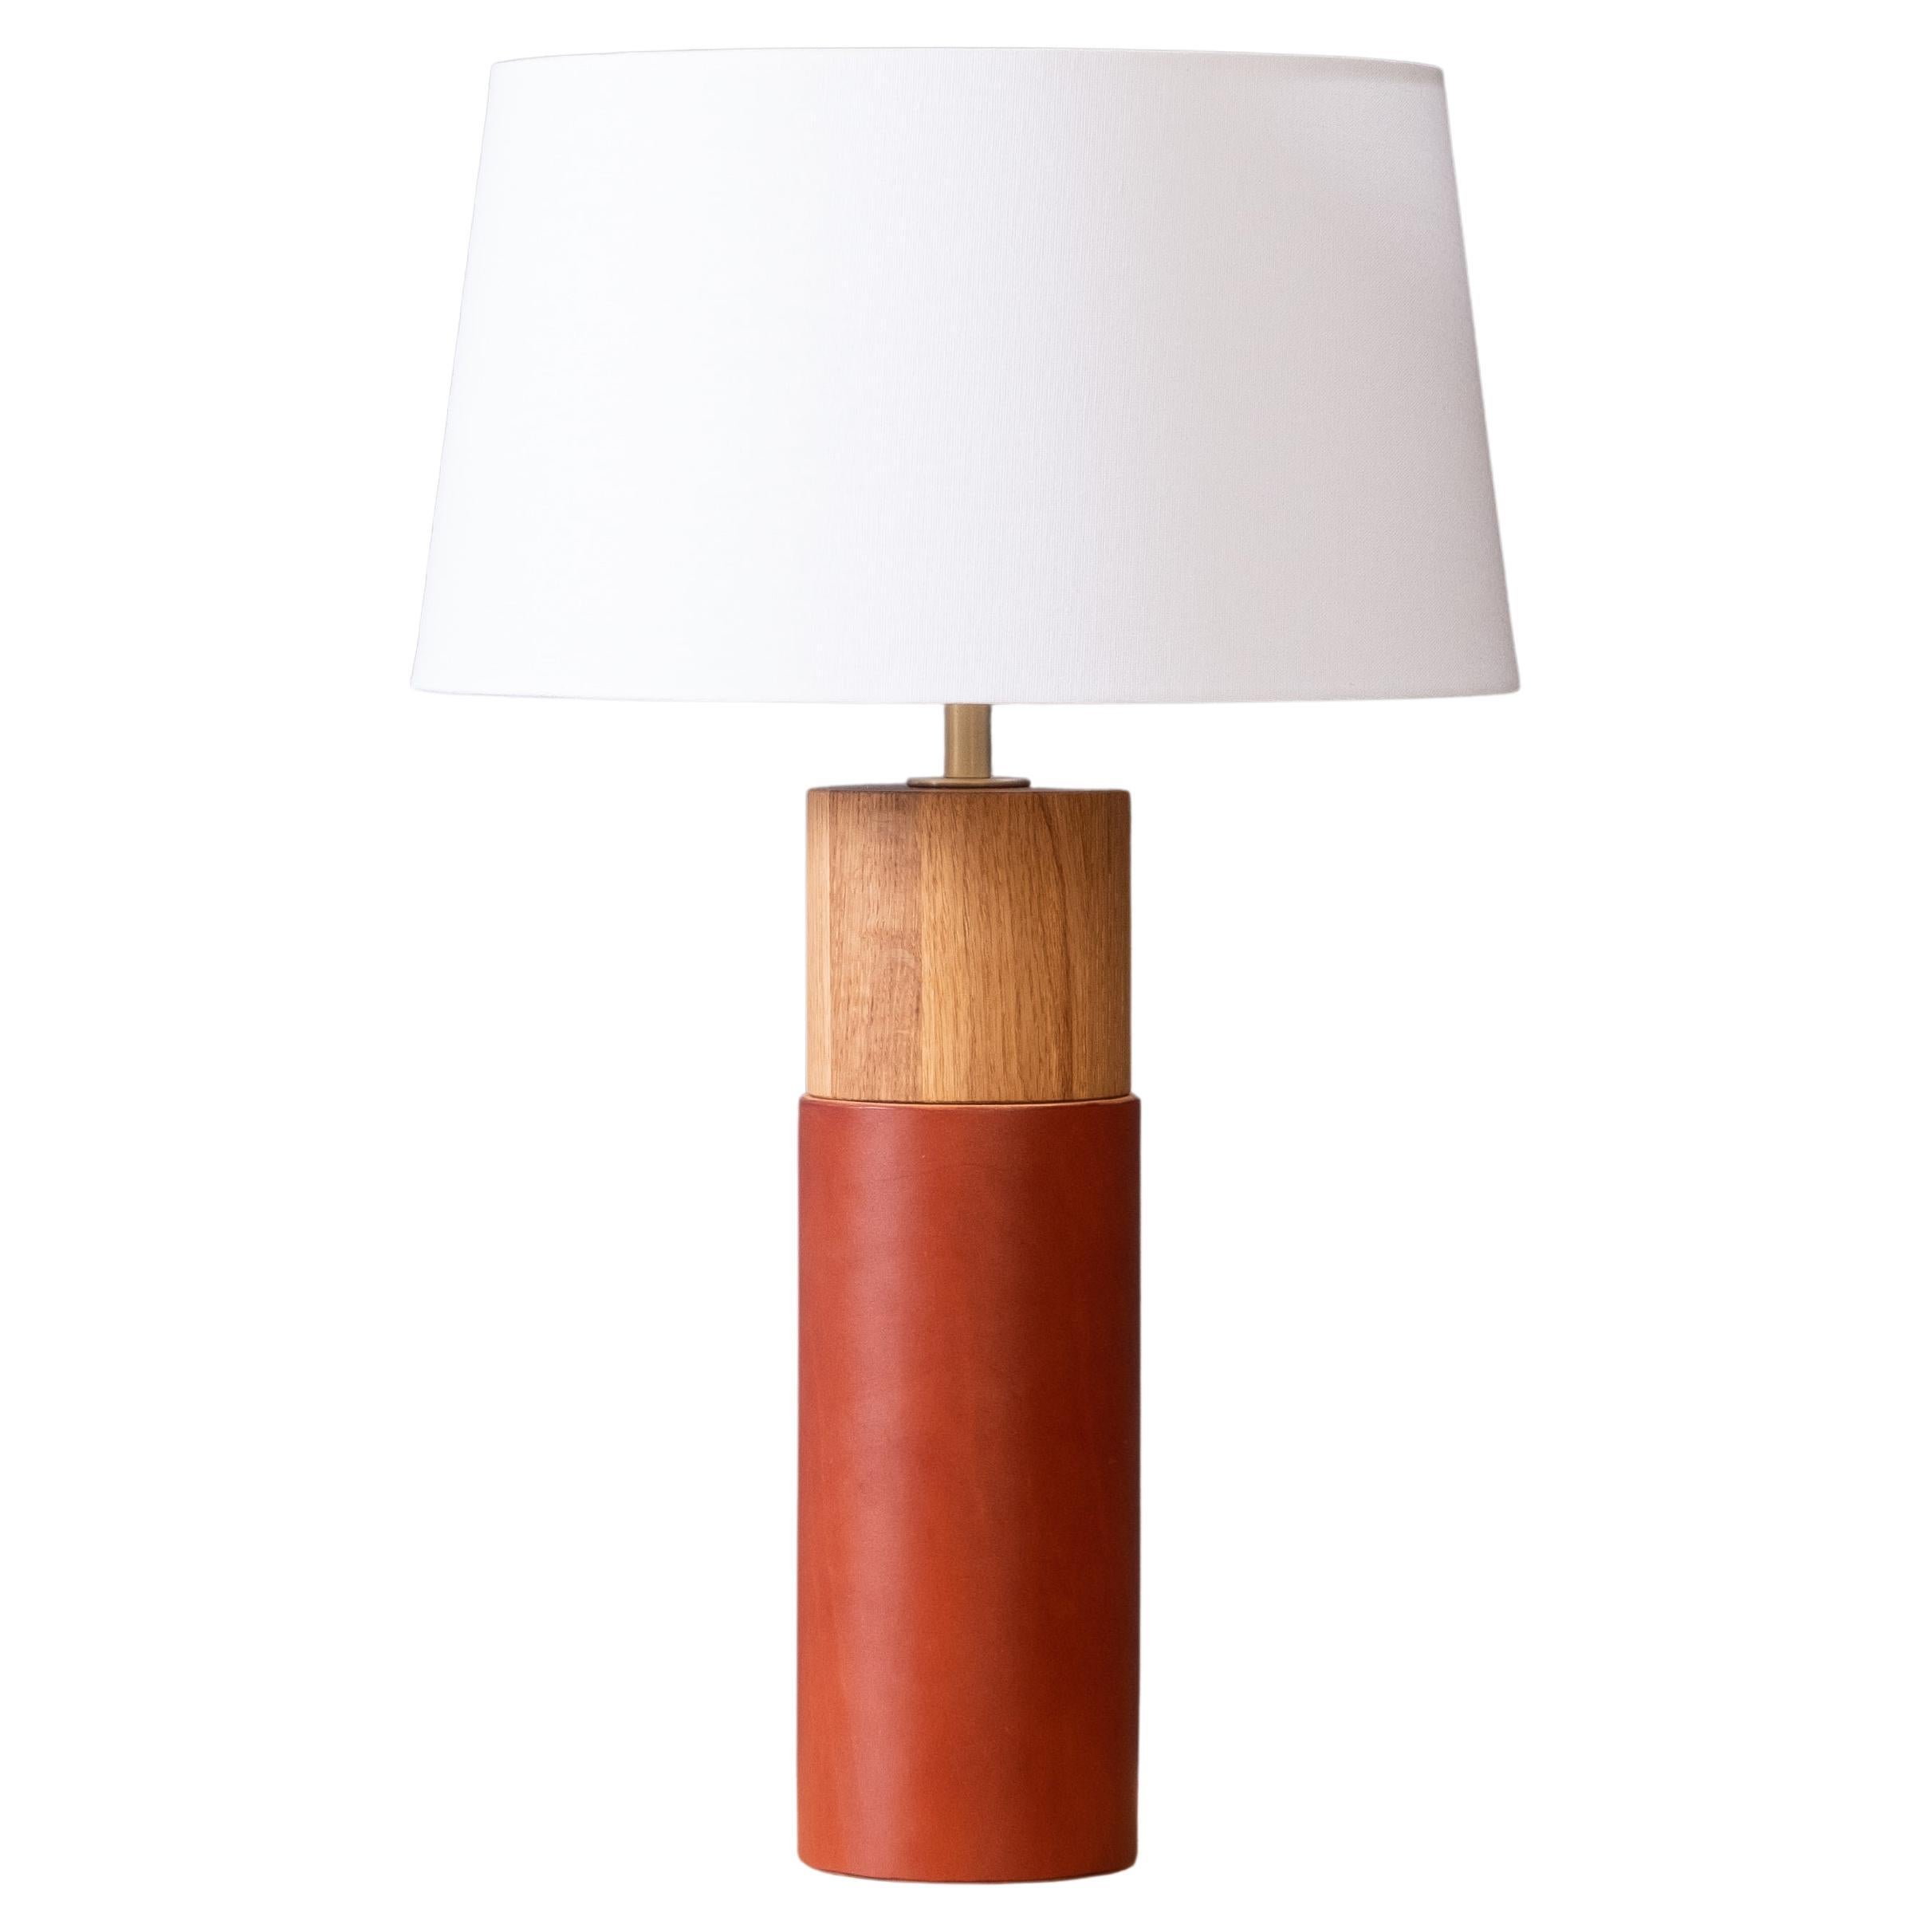 Minimalist Table Lamp with Leather-Wrapped Cylindrical White Oak Base